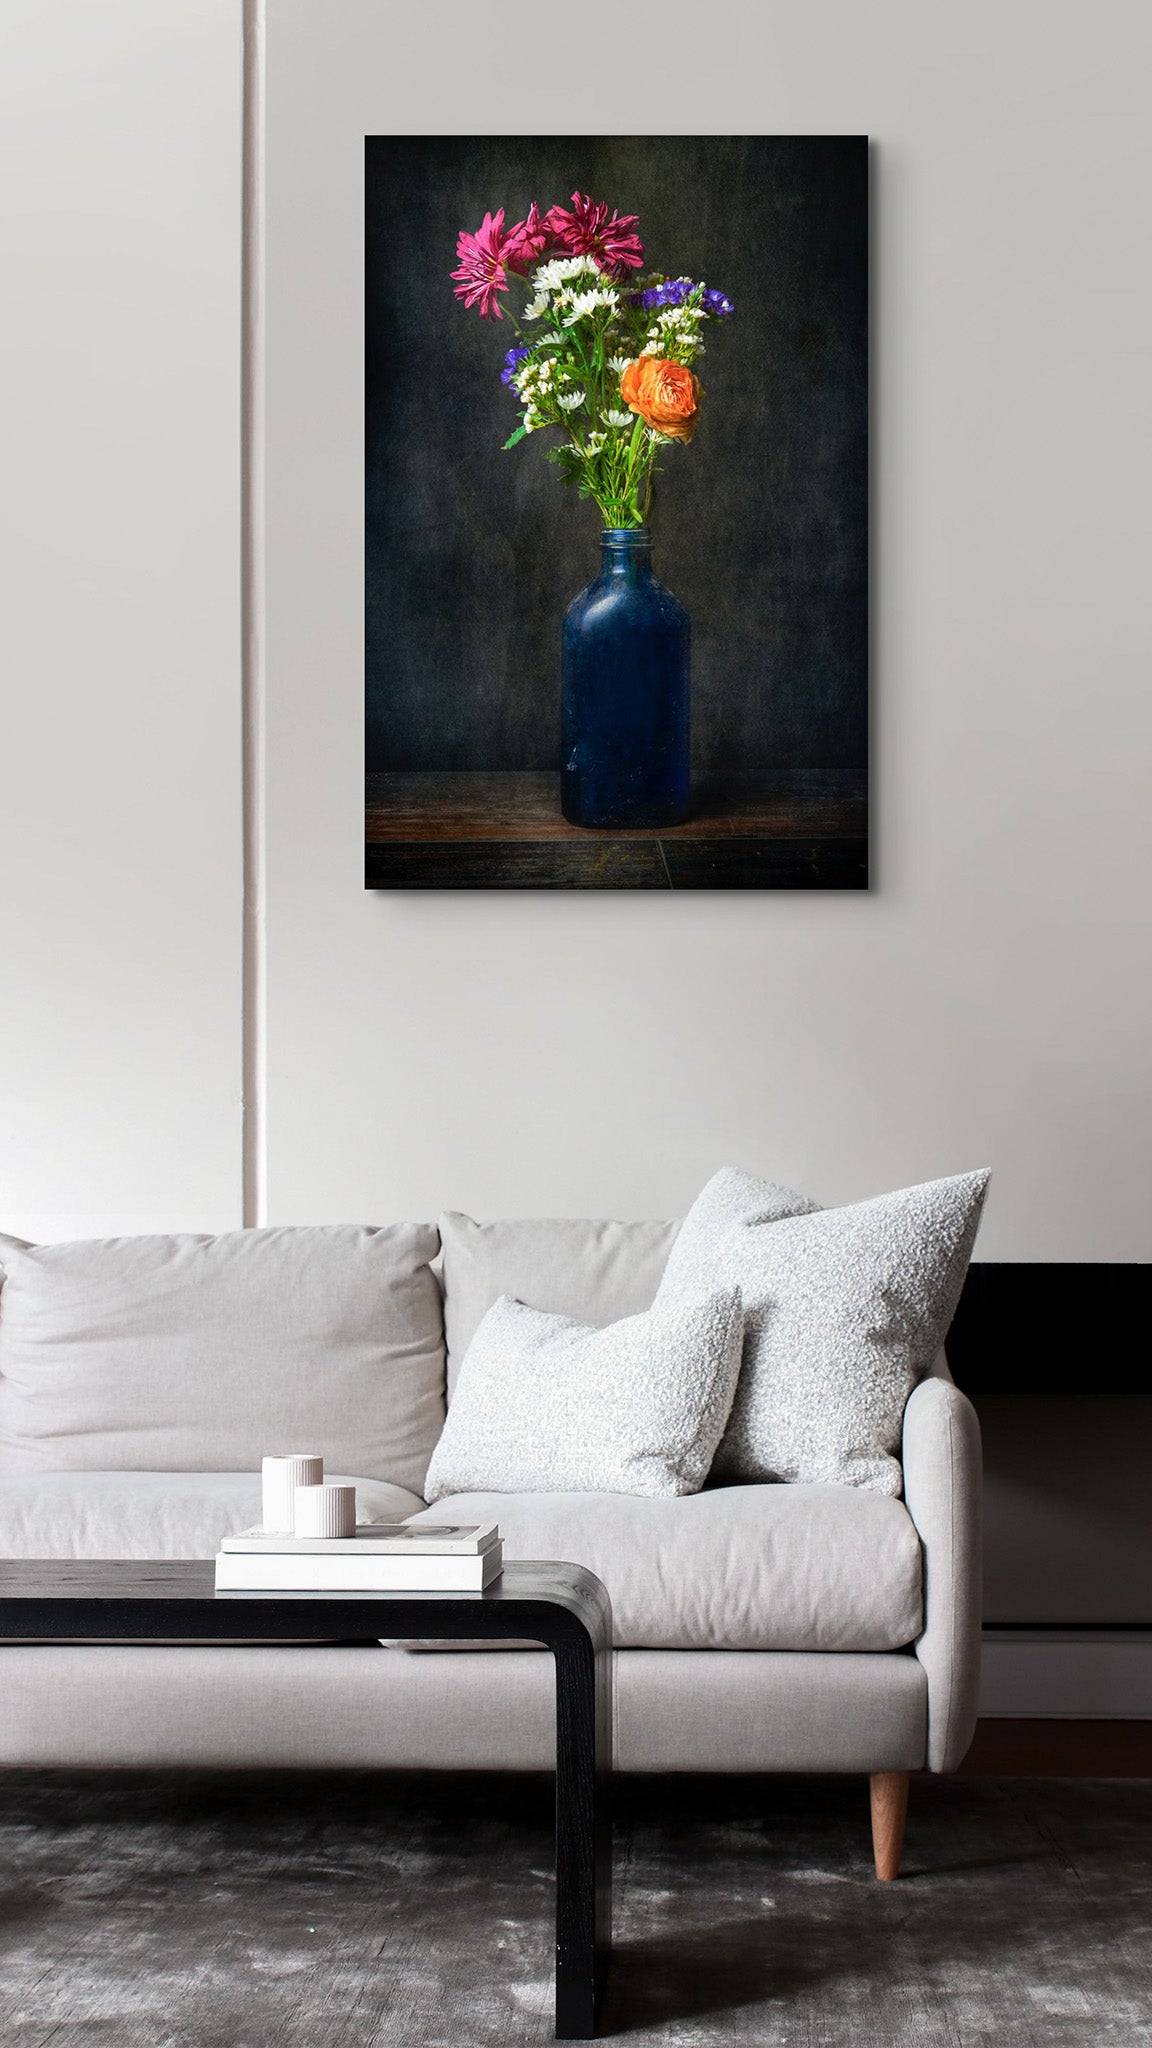 Picture hanging on the wall of a living room. The picture is a fine art flower photograph of a bouquet of flowers in an old bottle titled "Tangy Resolve" by Cameron Dreaux of Dreaux Fine Art.